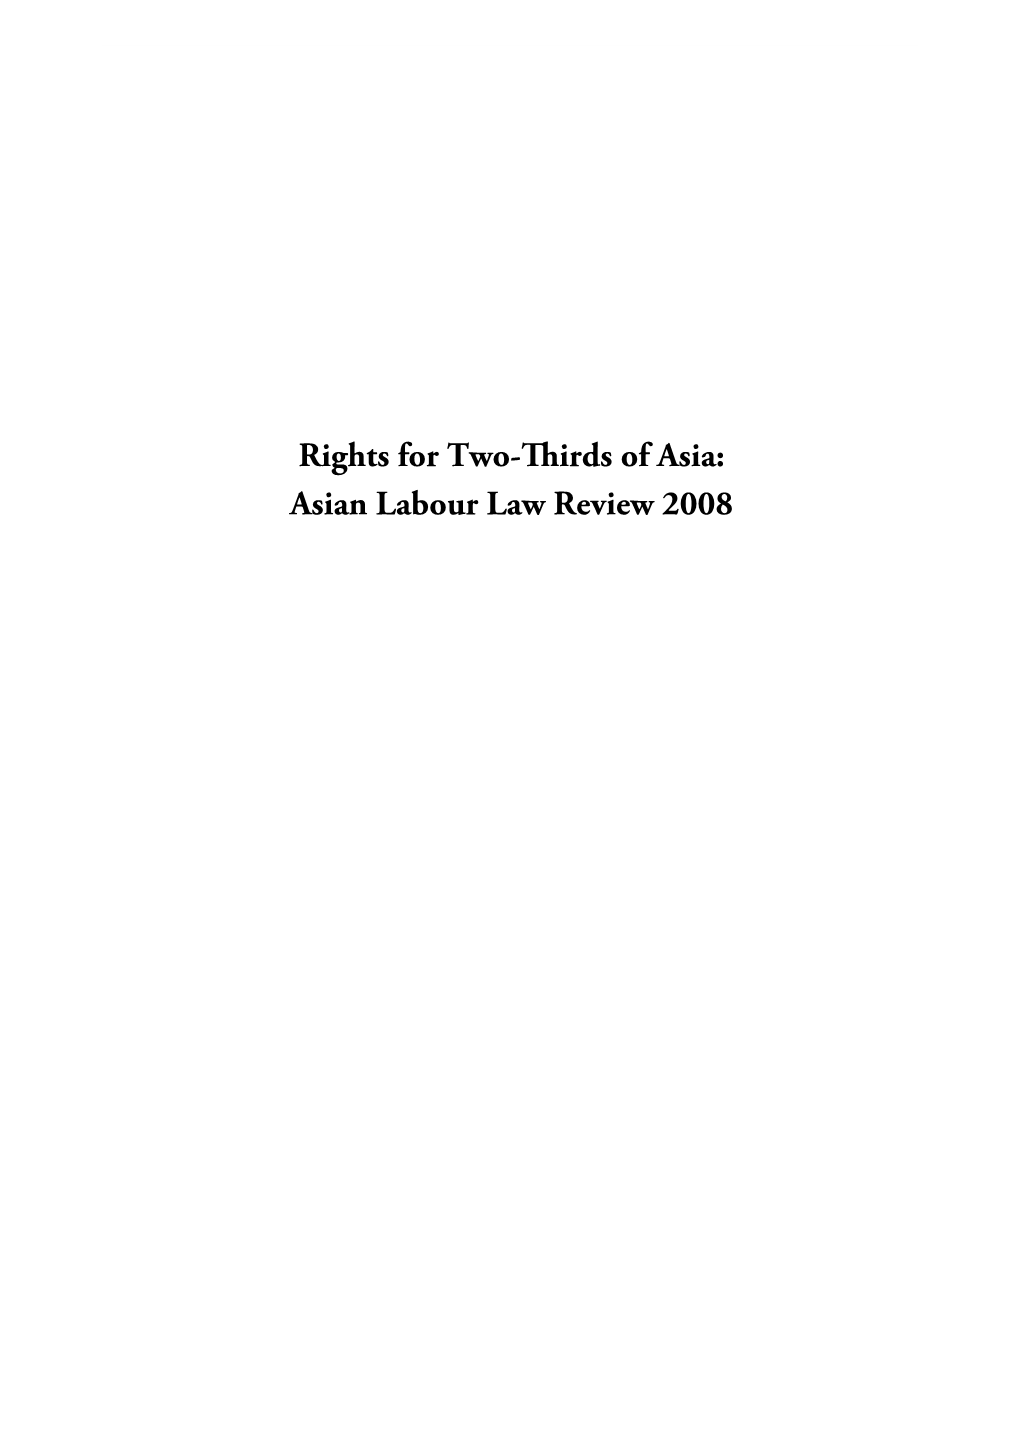 Asian Labour Law Review 2008 Ii Asian Labour Law Review 2008 ASIA MONITOR RESOURCE CENTRE